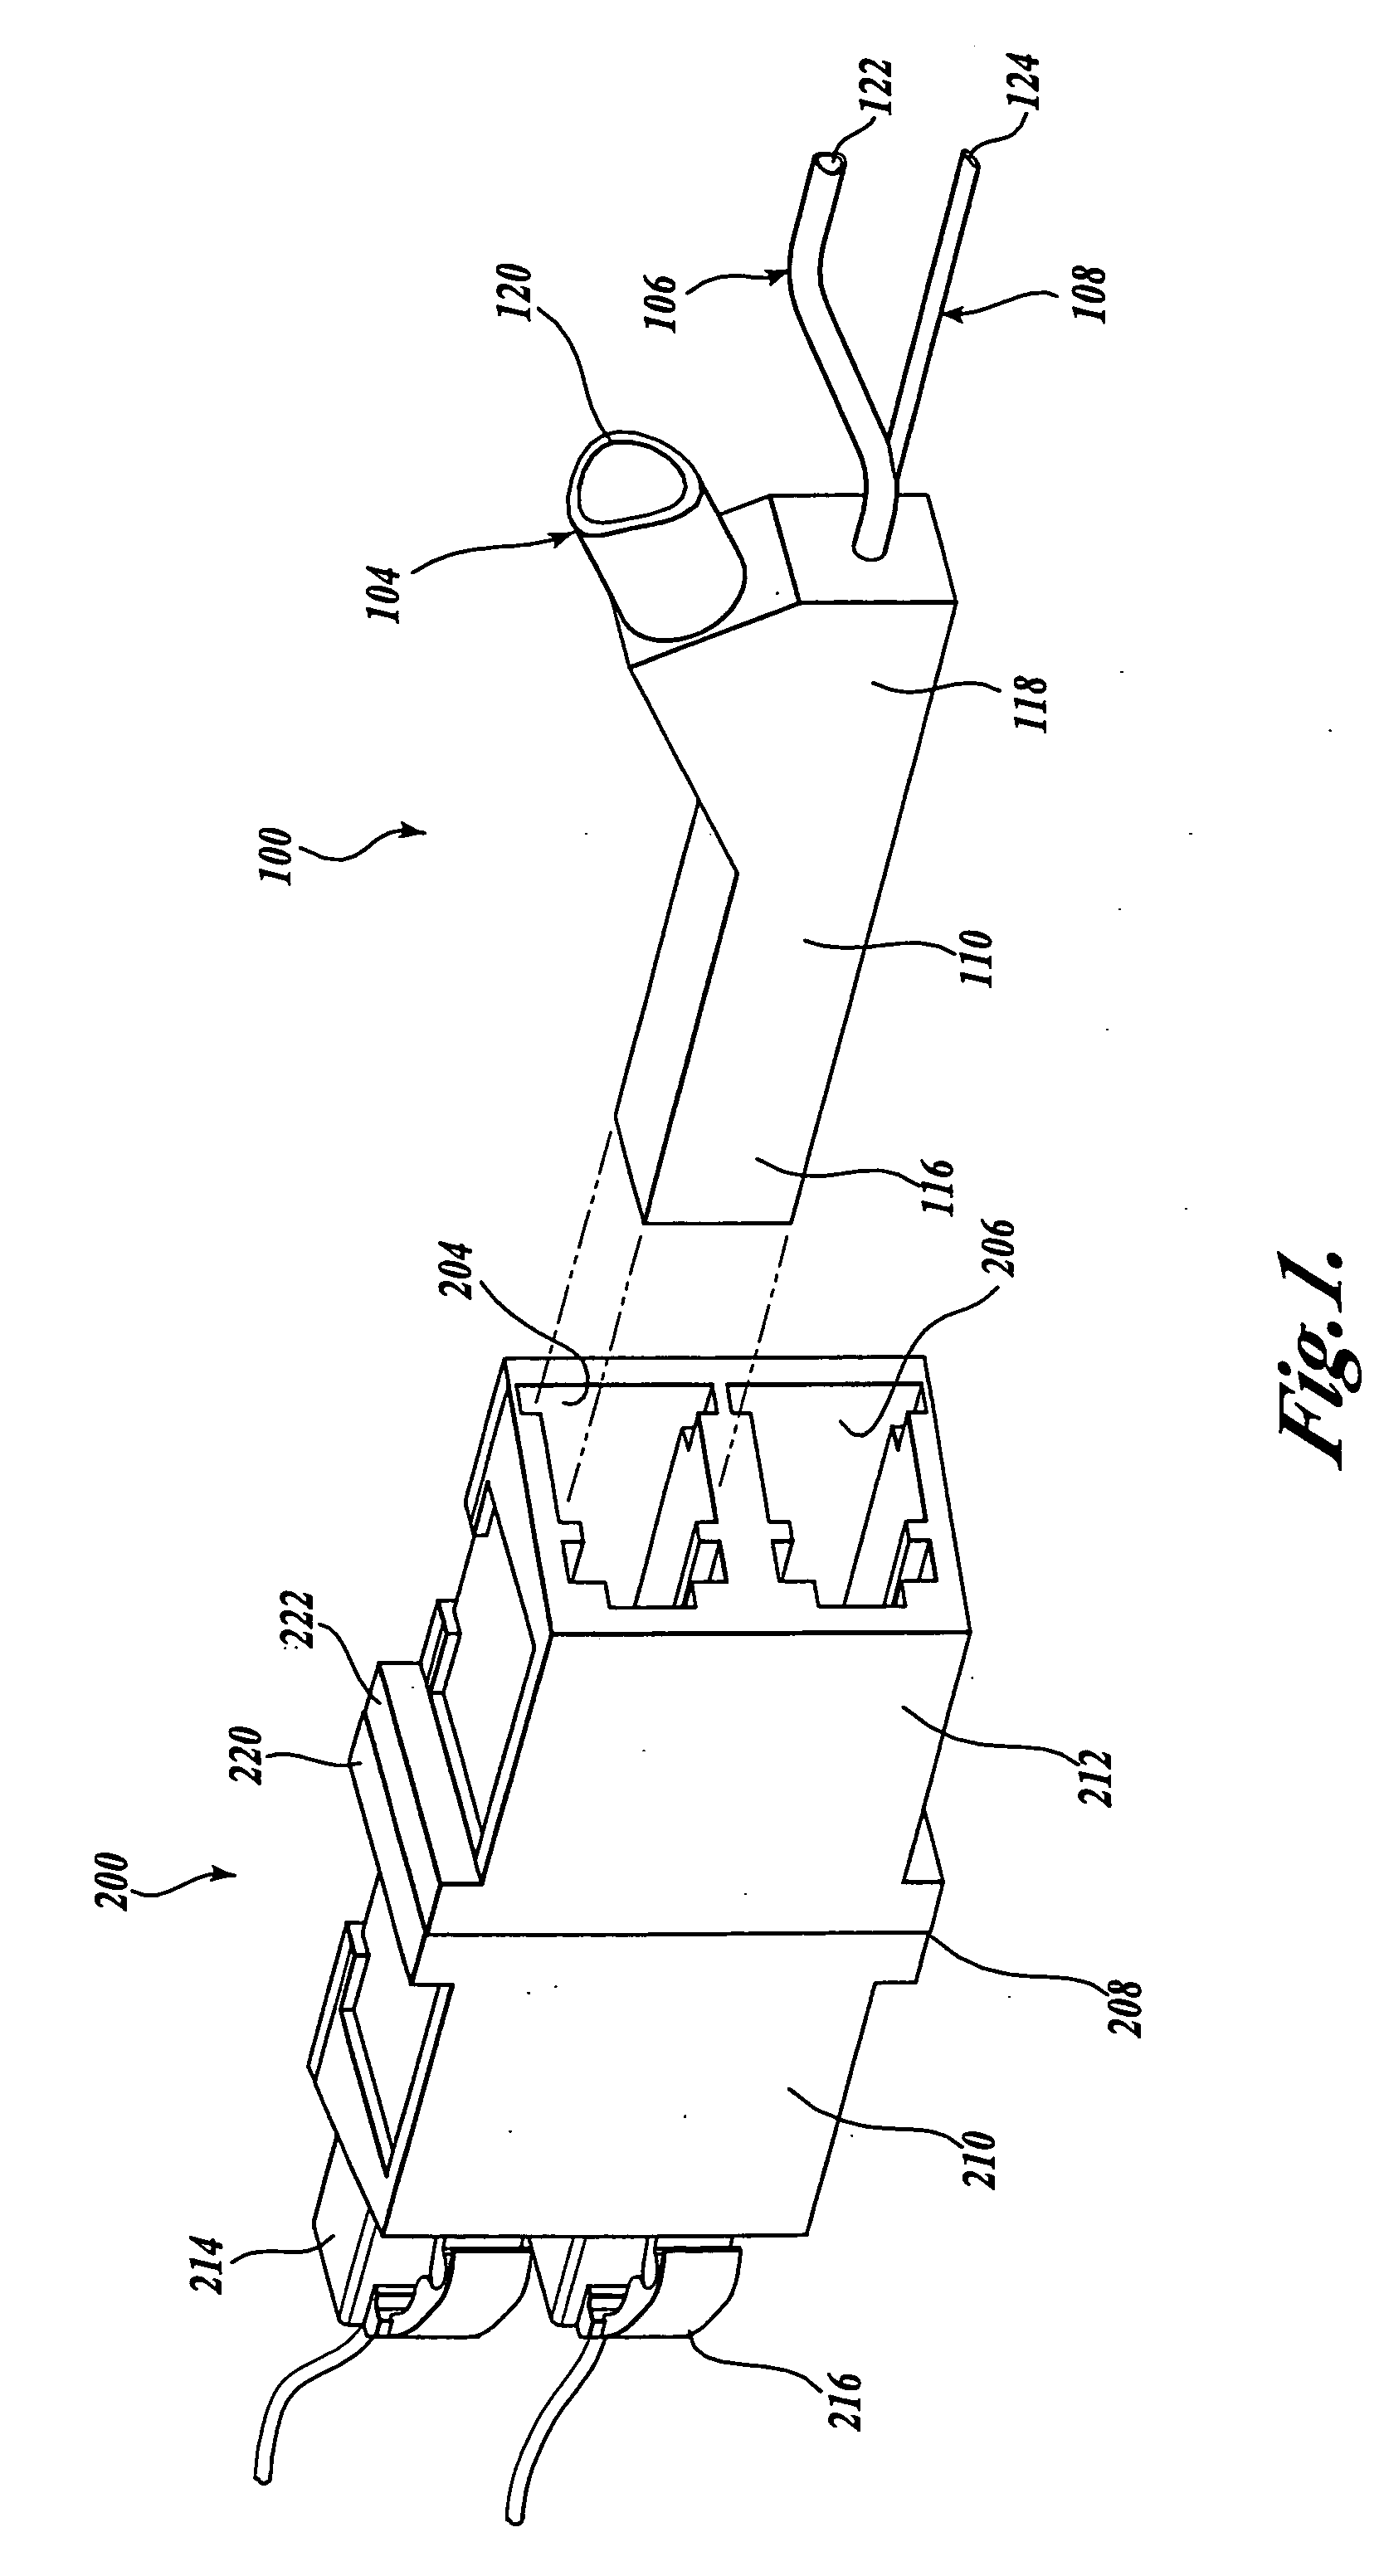 Fiber-optic endface cleaning assembly and method